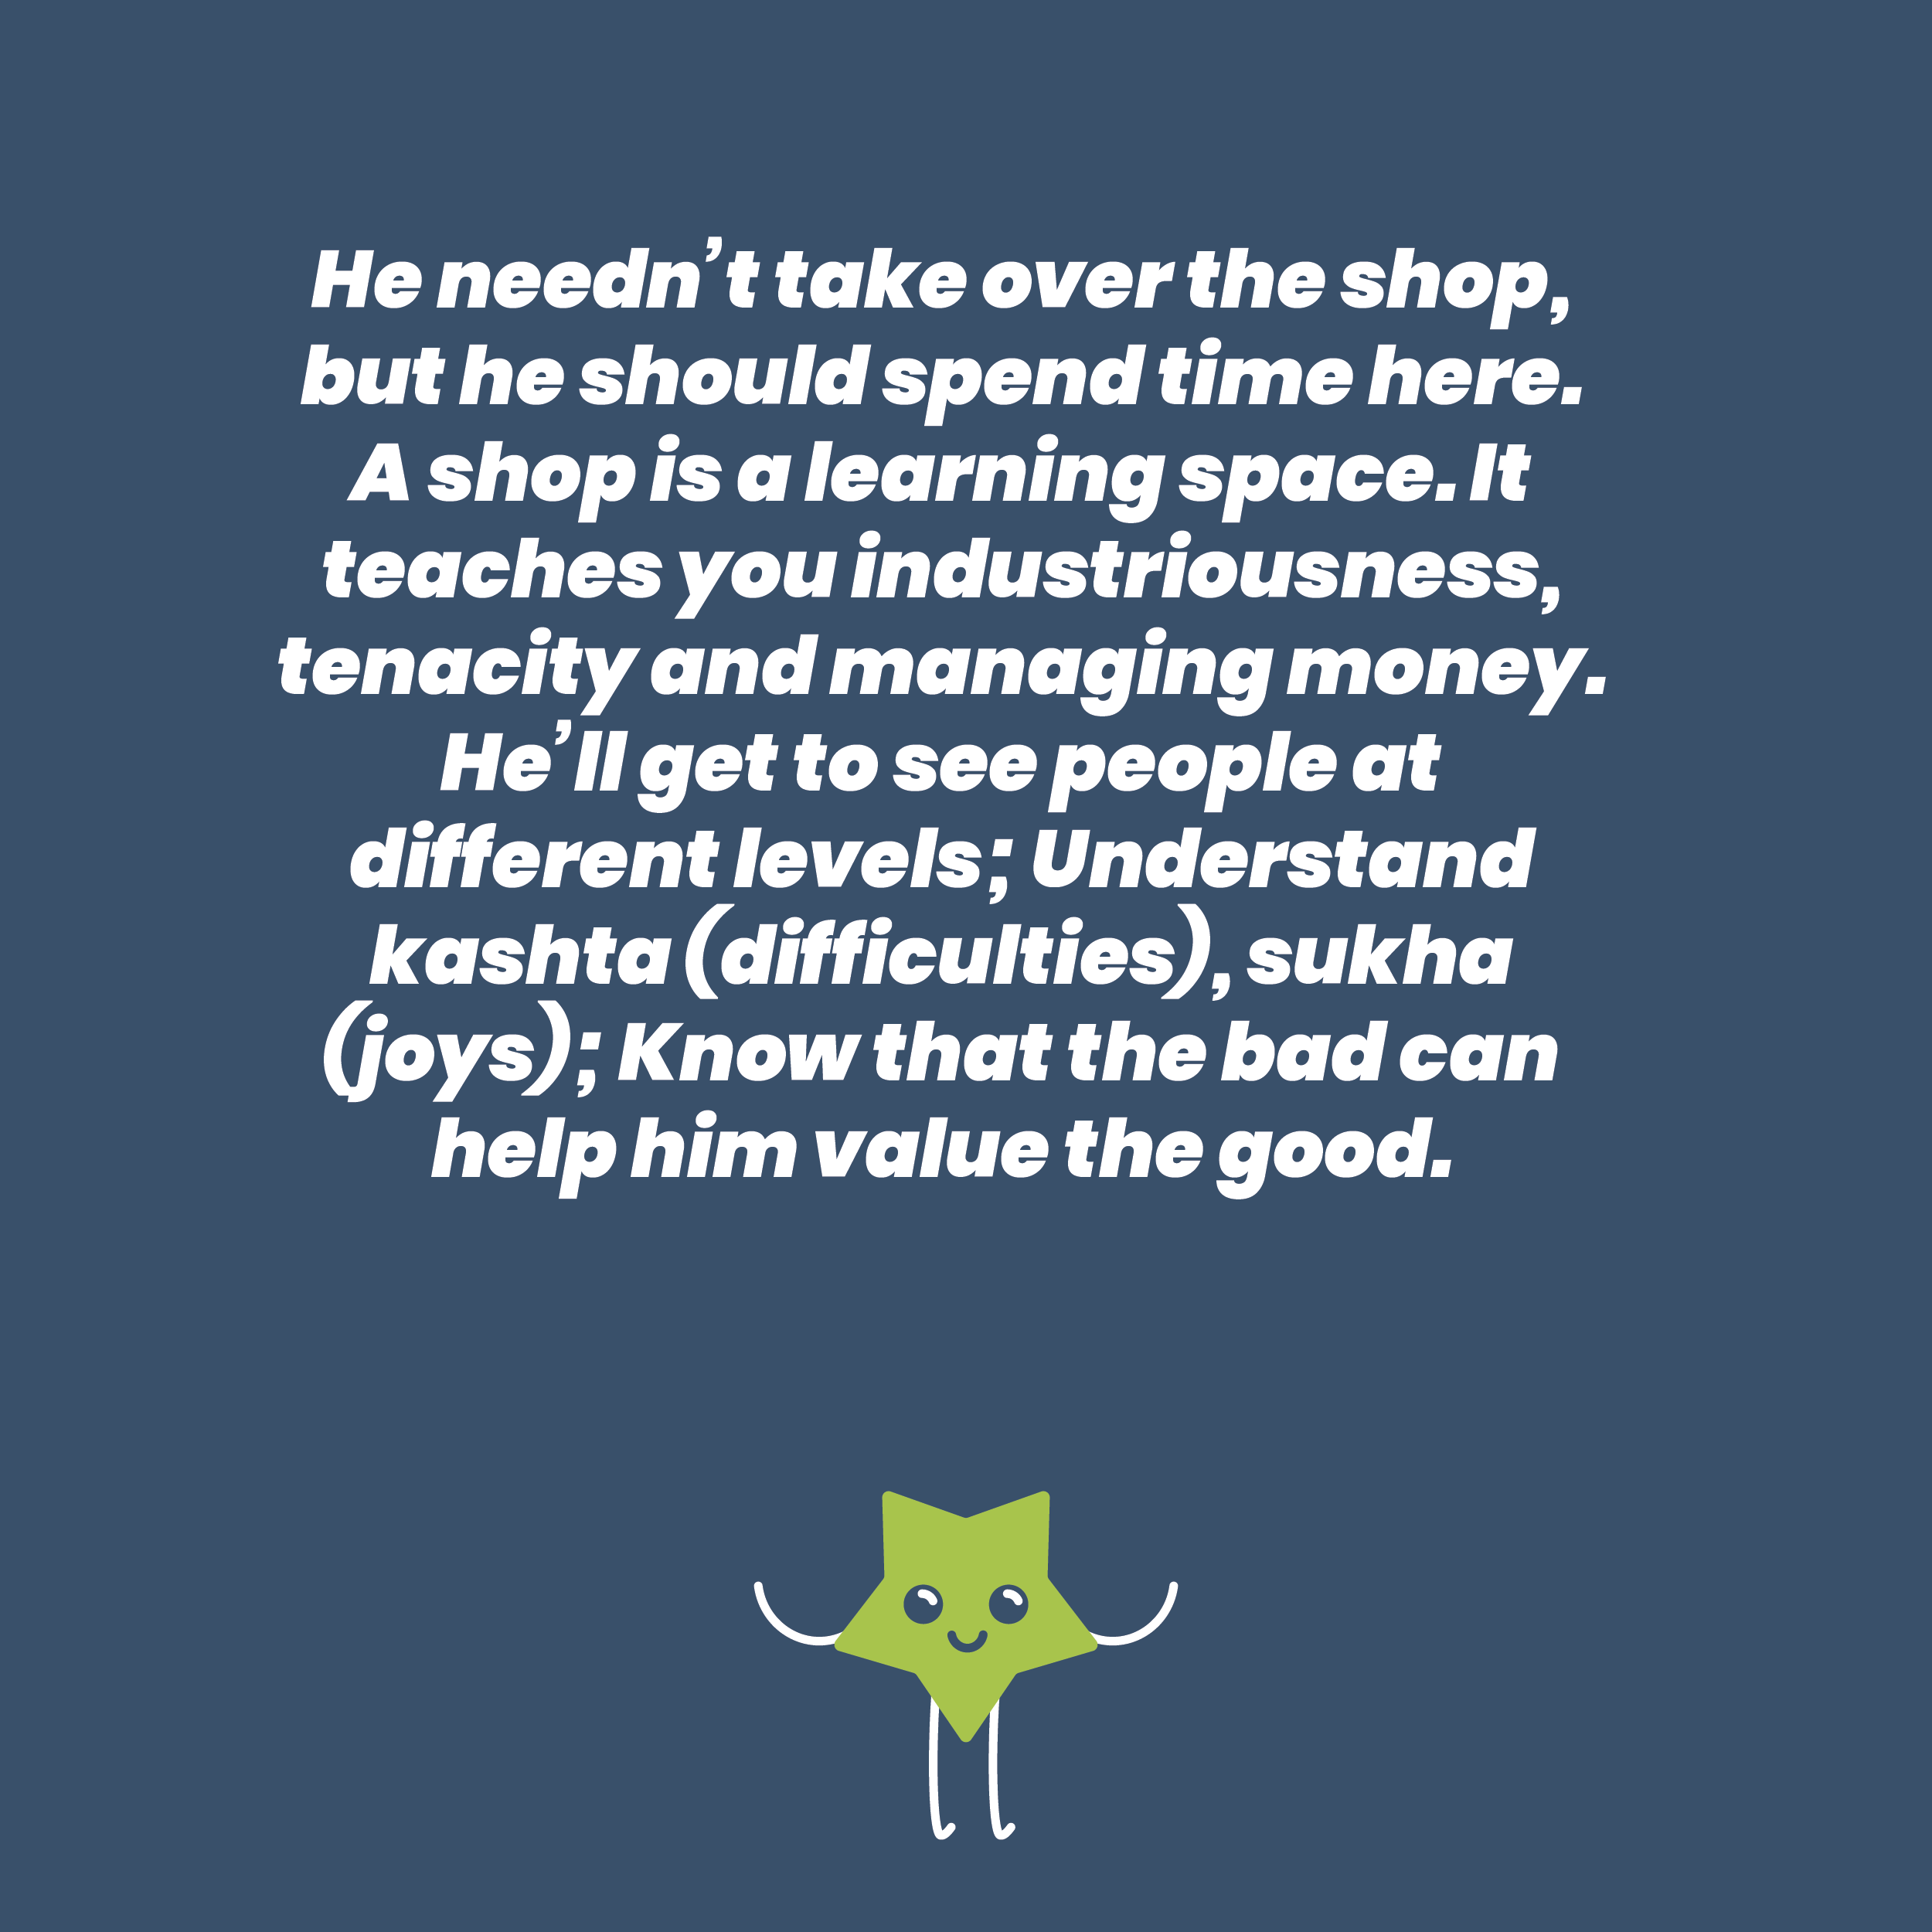 He needn’t take over the shop, but he should spend time here. A shop is a learning space. It teaches you industriousness, tenacity and managing money. He’ll get to see people at different levels; Understand kashta (difficulties), sukha (joys); Know that the bad can help him value the good.